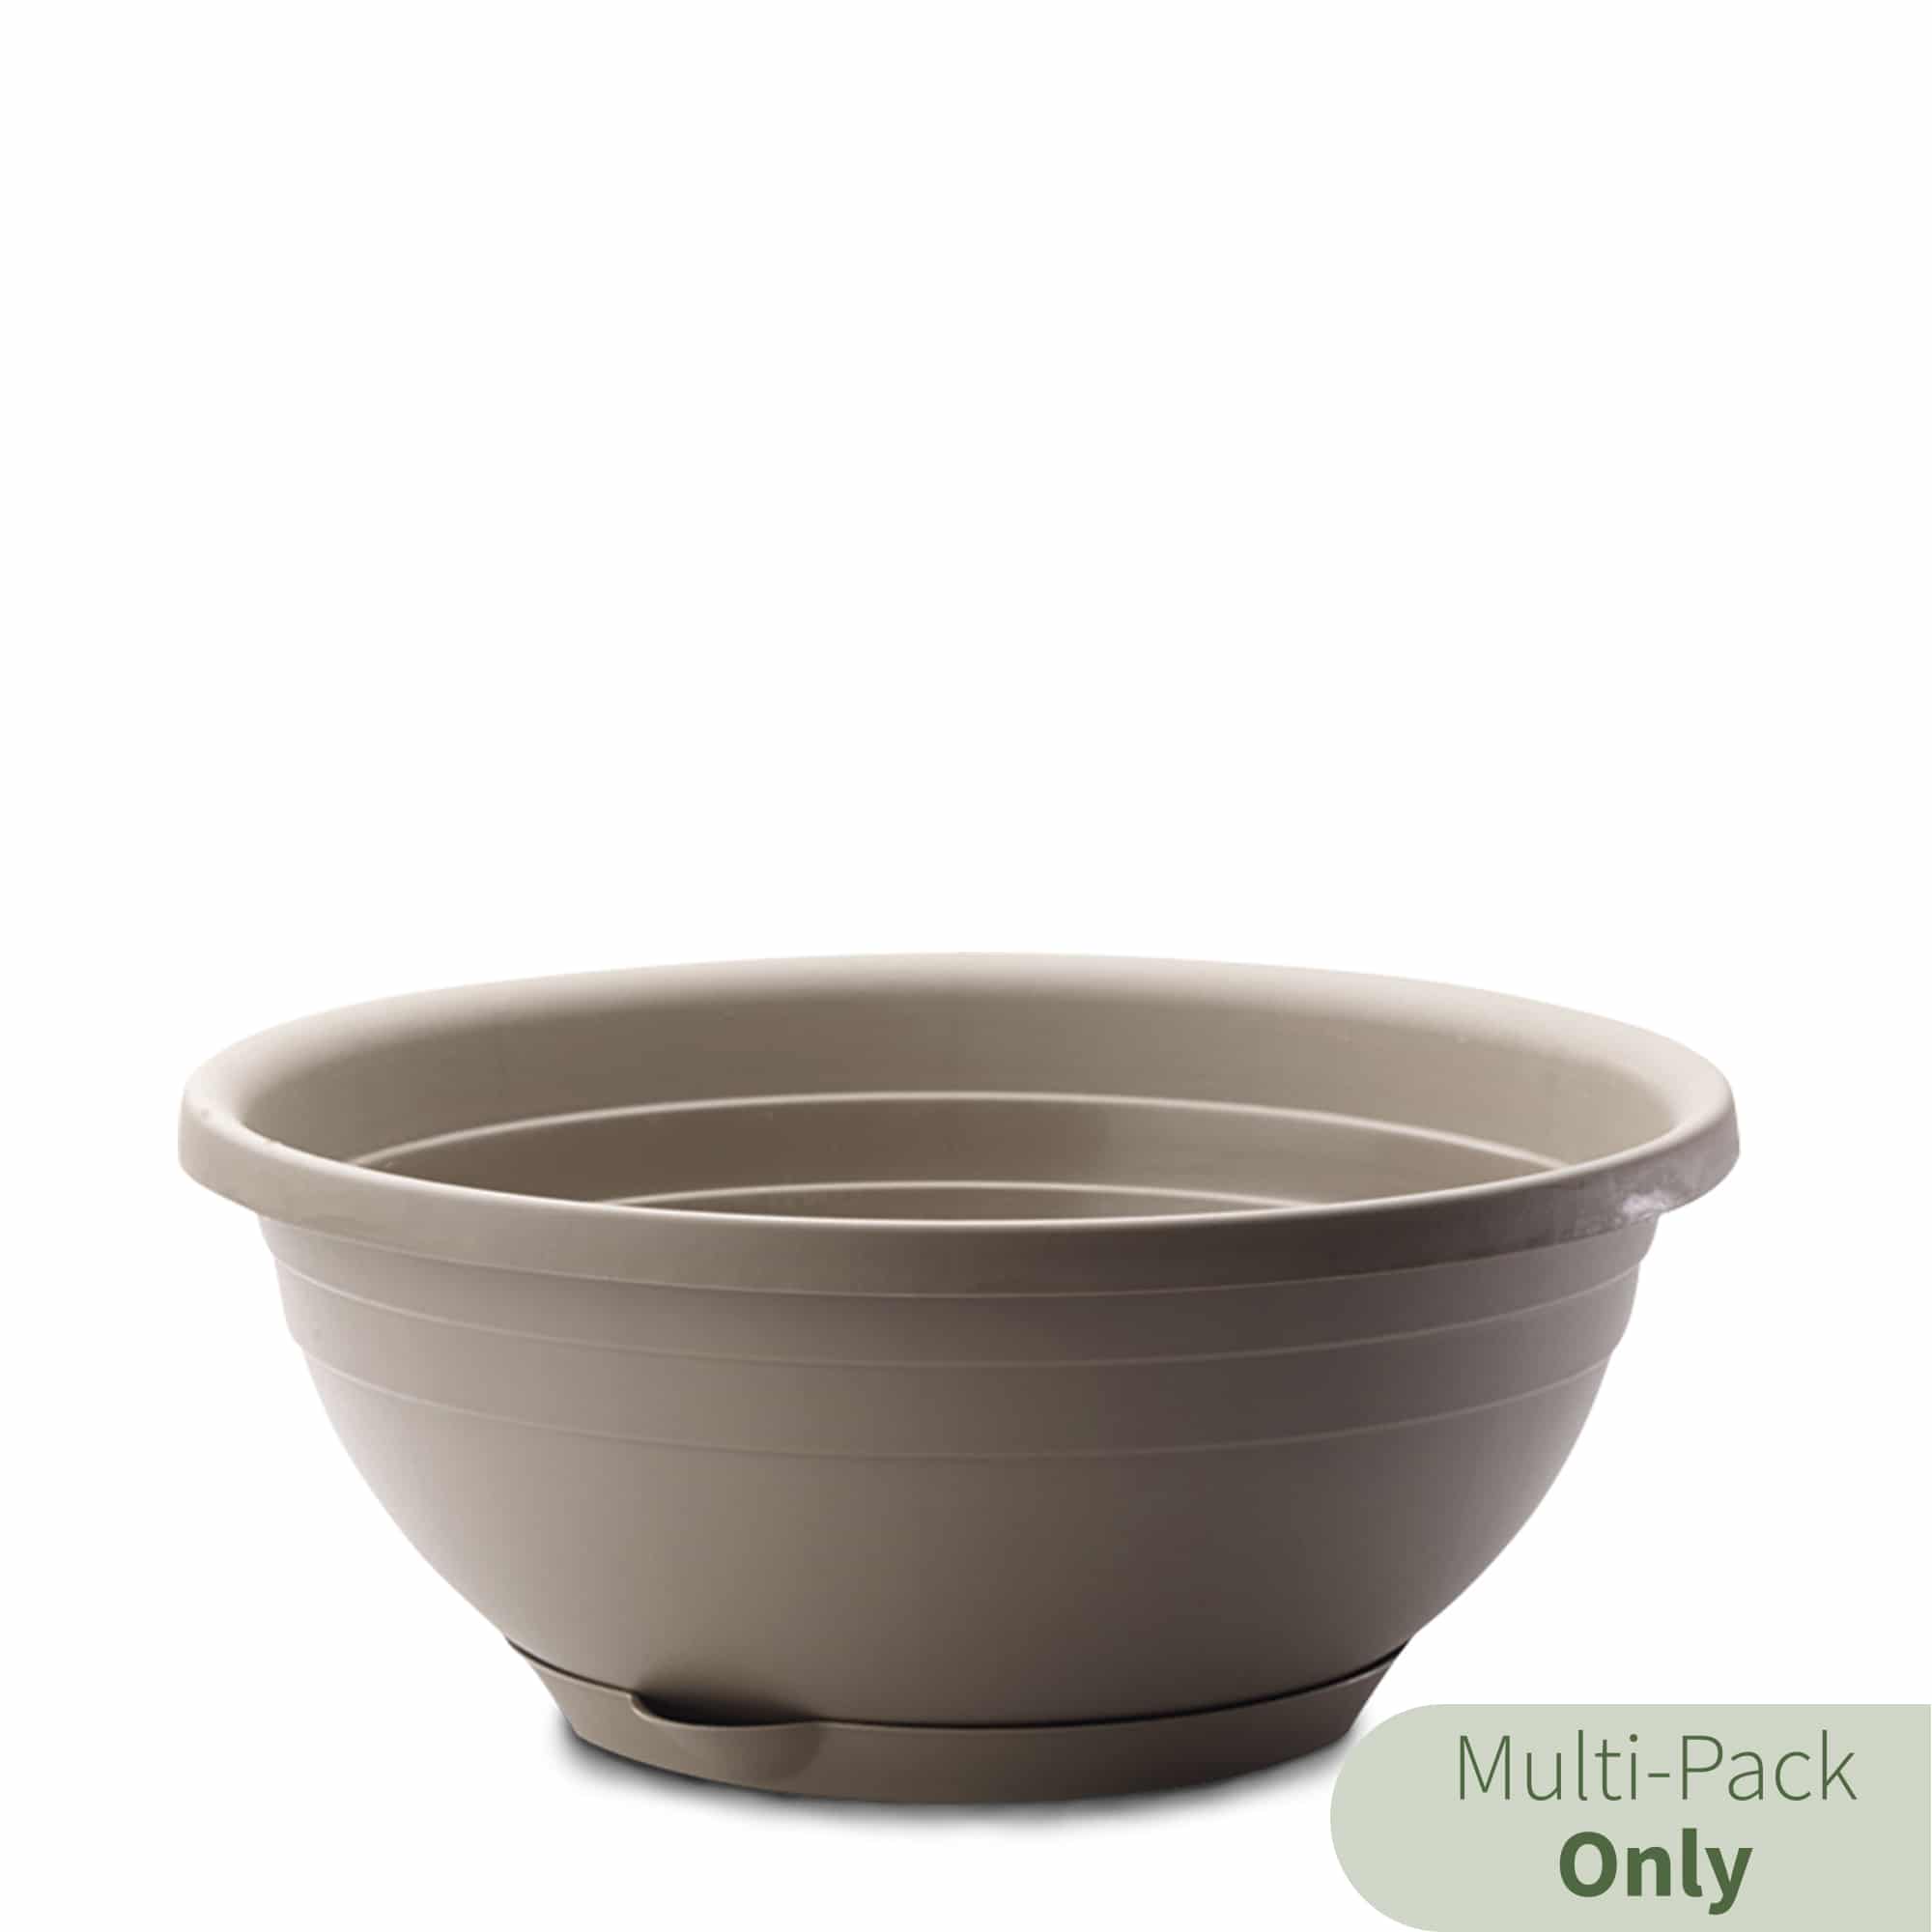 emma bowl hanging planter in cappuccino brown